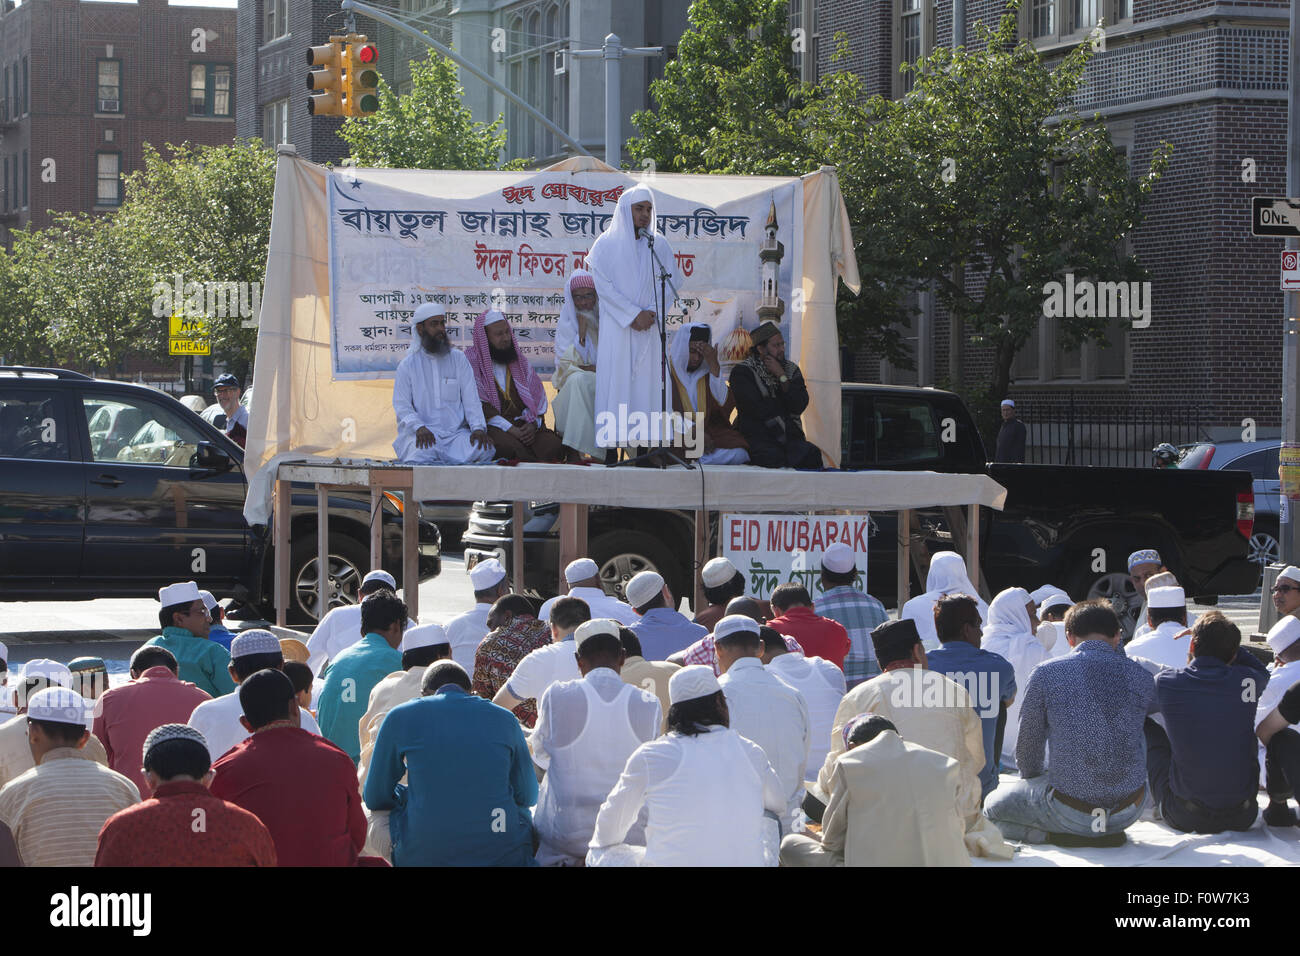 Imam leads Muslims in prayer outside a mosque in Kensington, Brooklyn, NY for 'Eid al-Fitr.' The holiday,celebrated around the w Stock Photo